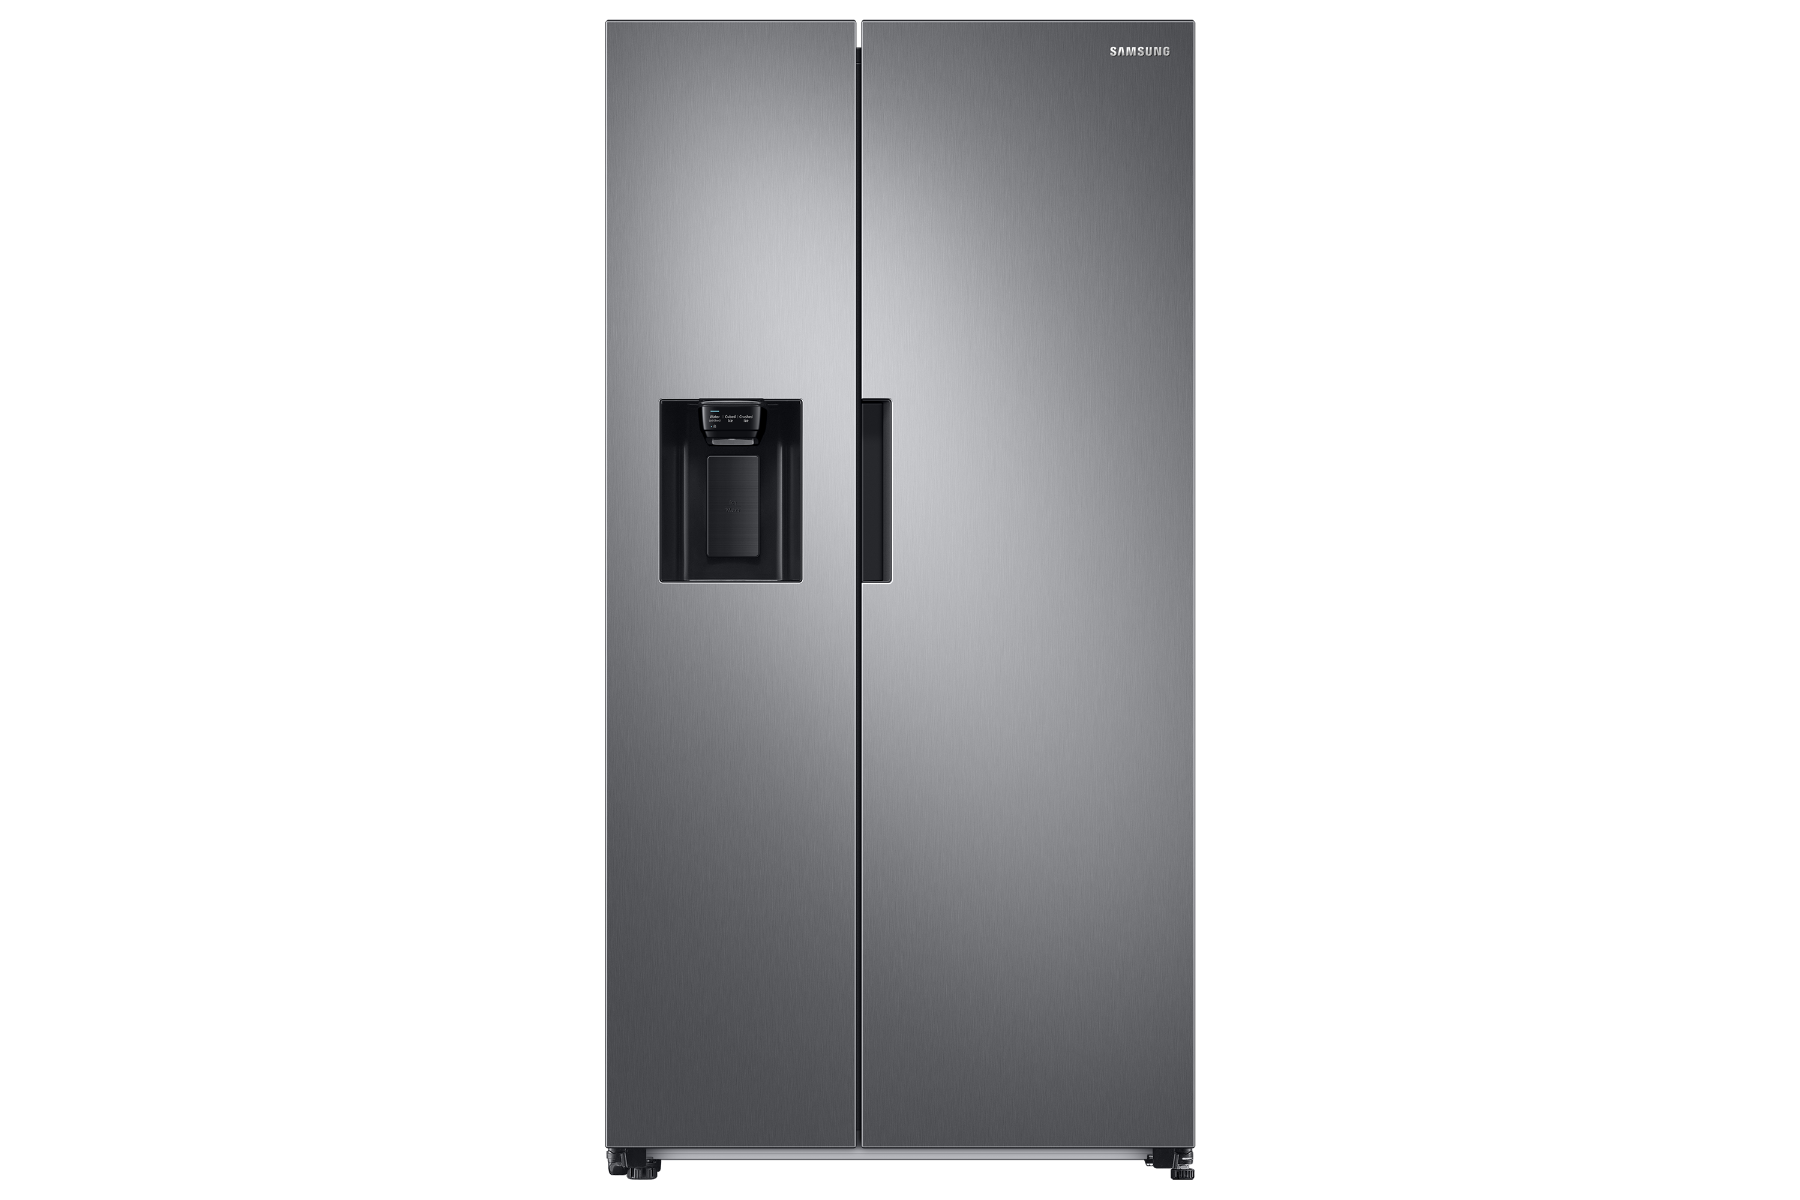 Samsung Series 7 RS67A8810S9/EU American Style Fridge Freezer With Spacemax™ Technology - Silver